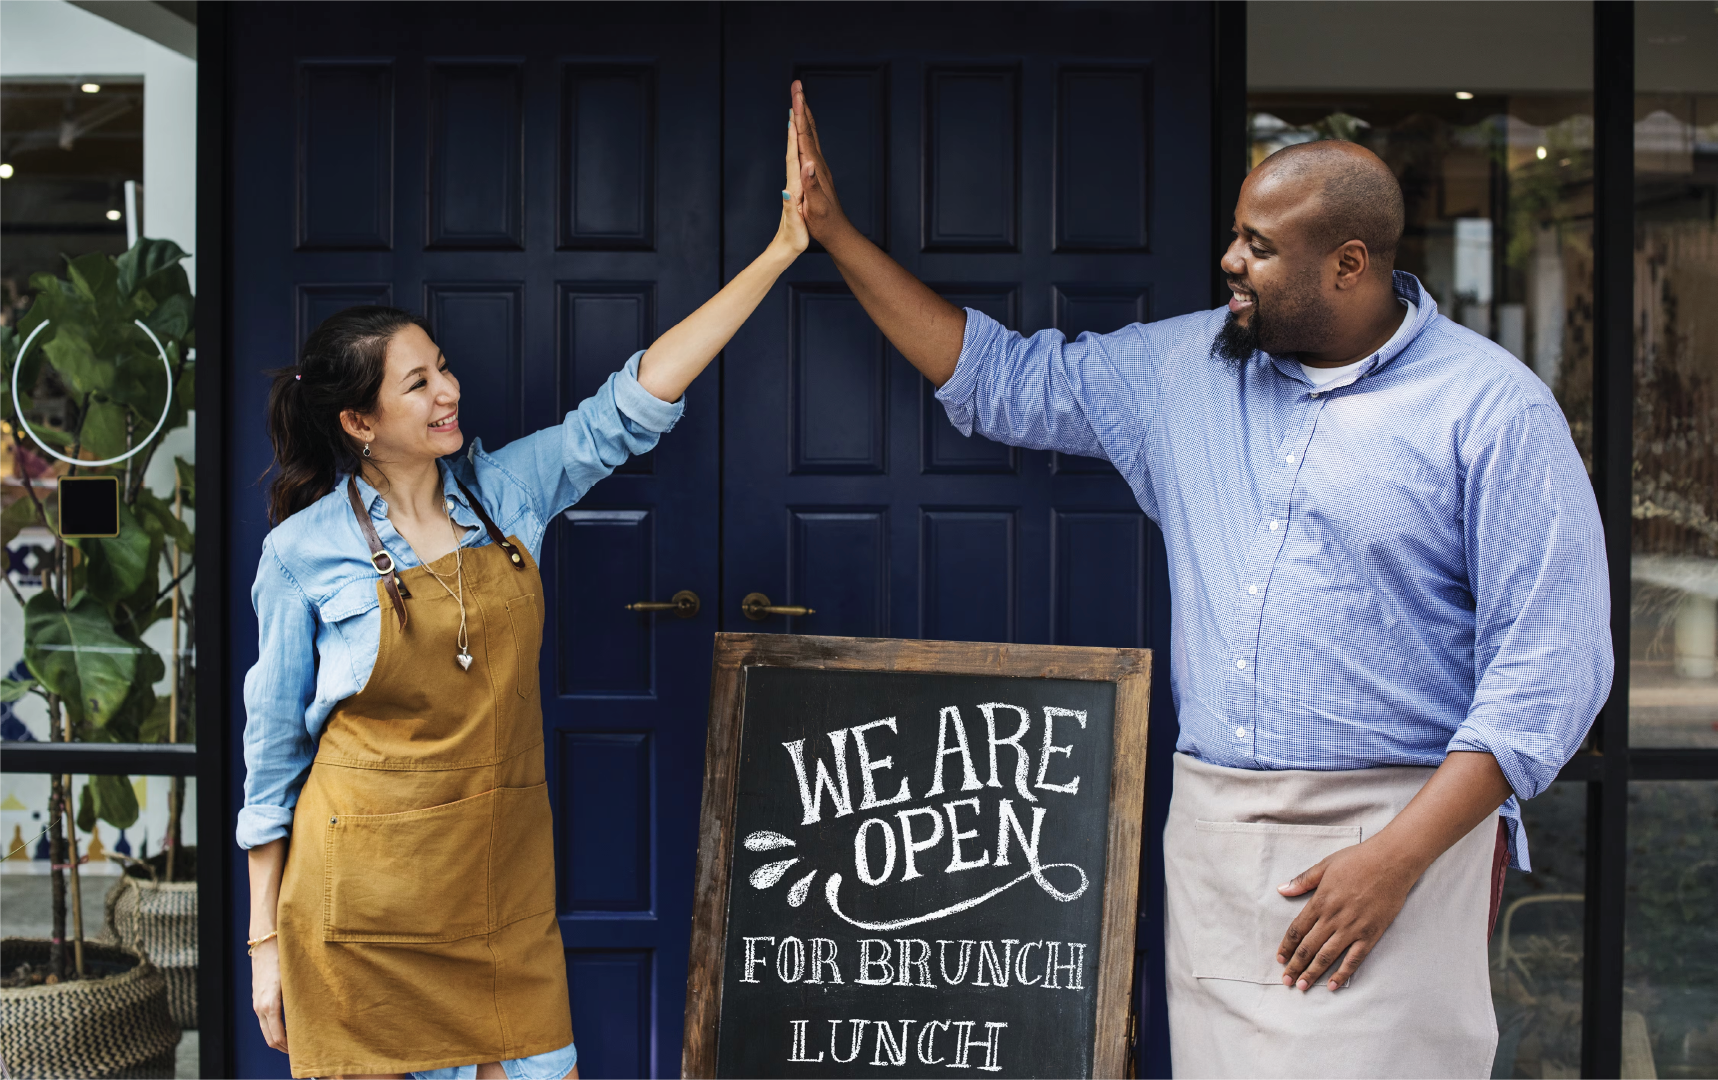 5 pitfalls to avoid when opening a new business